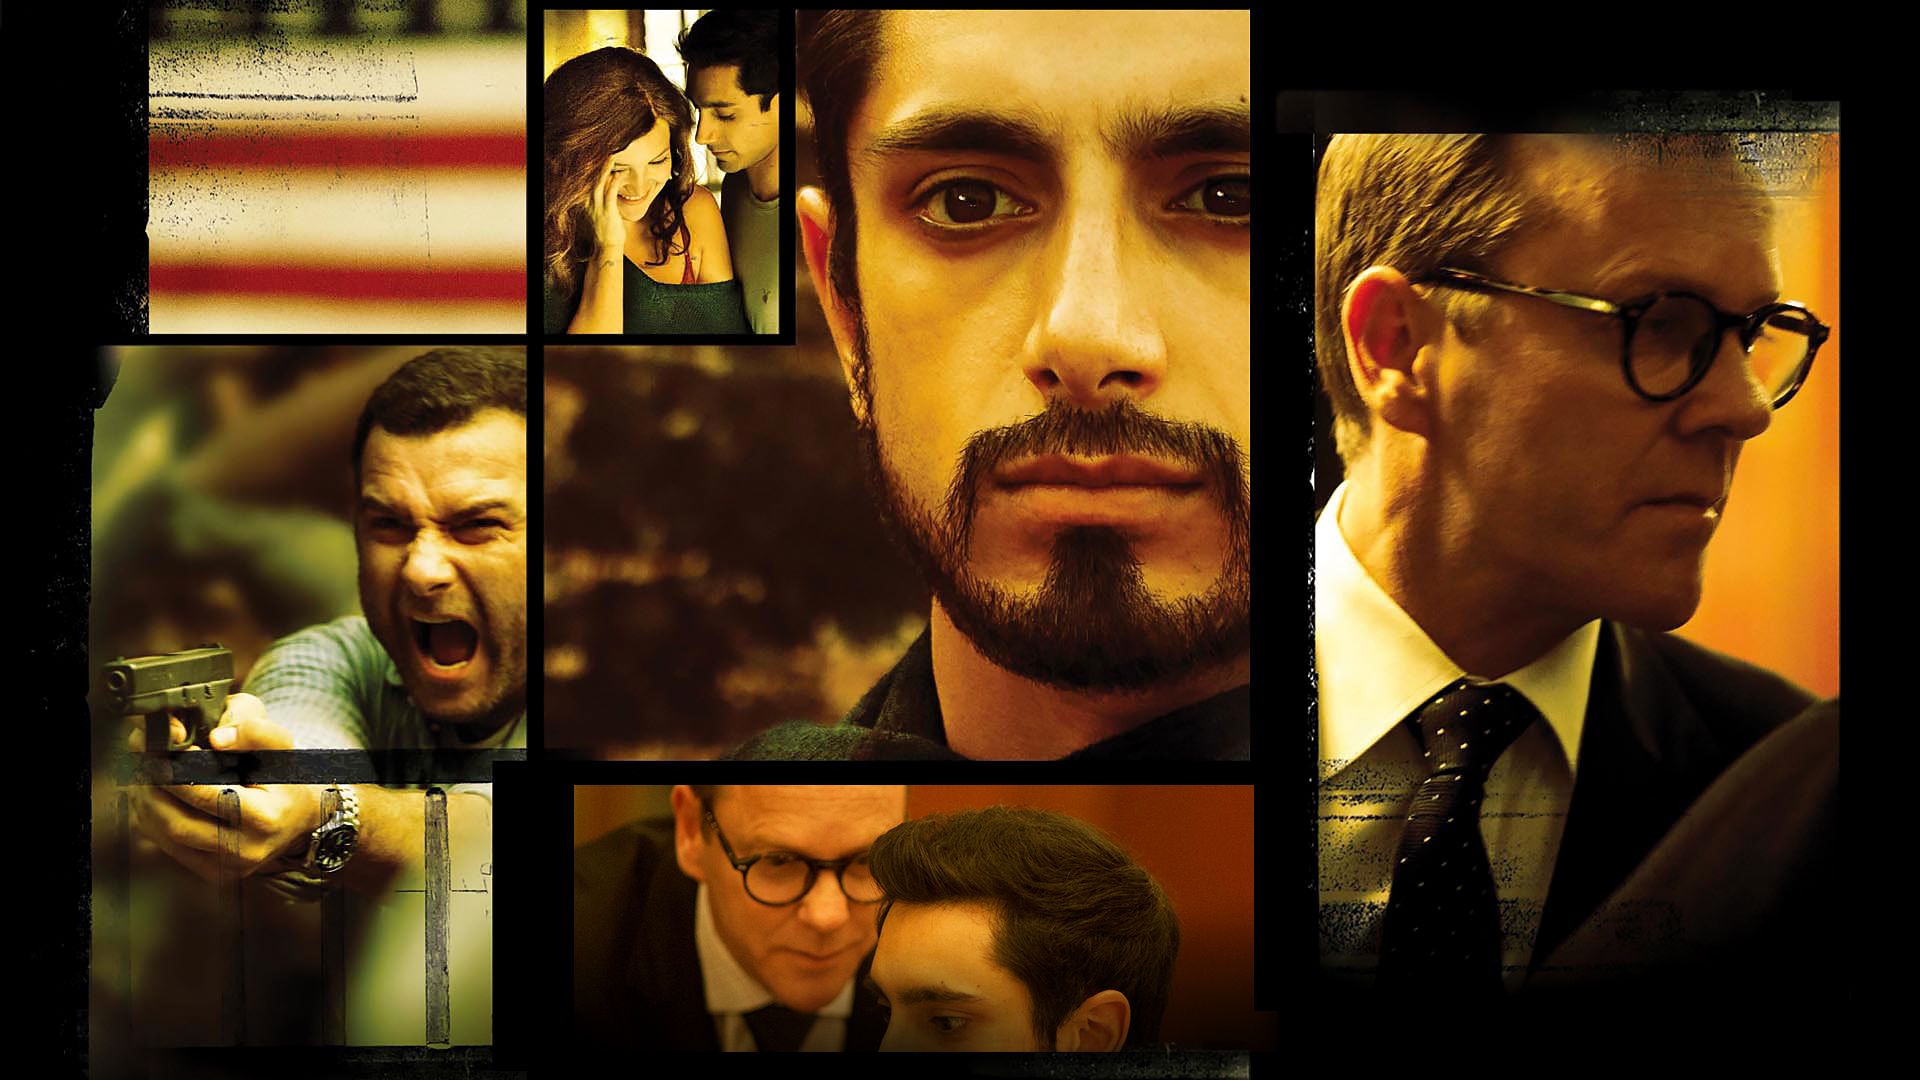 The Reluctant Fundamentalist background